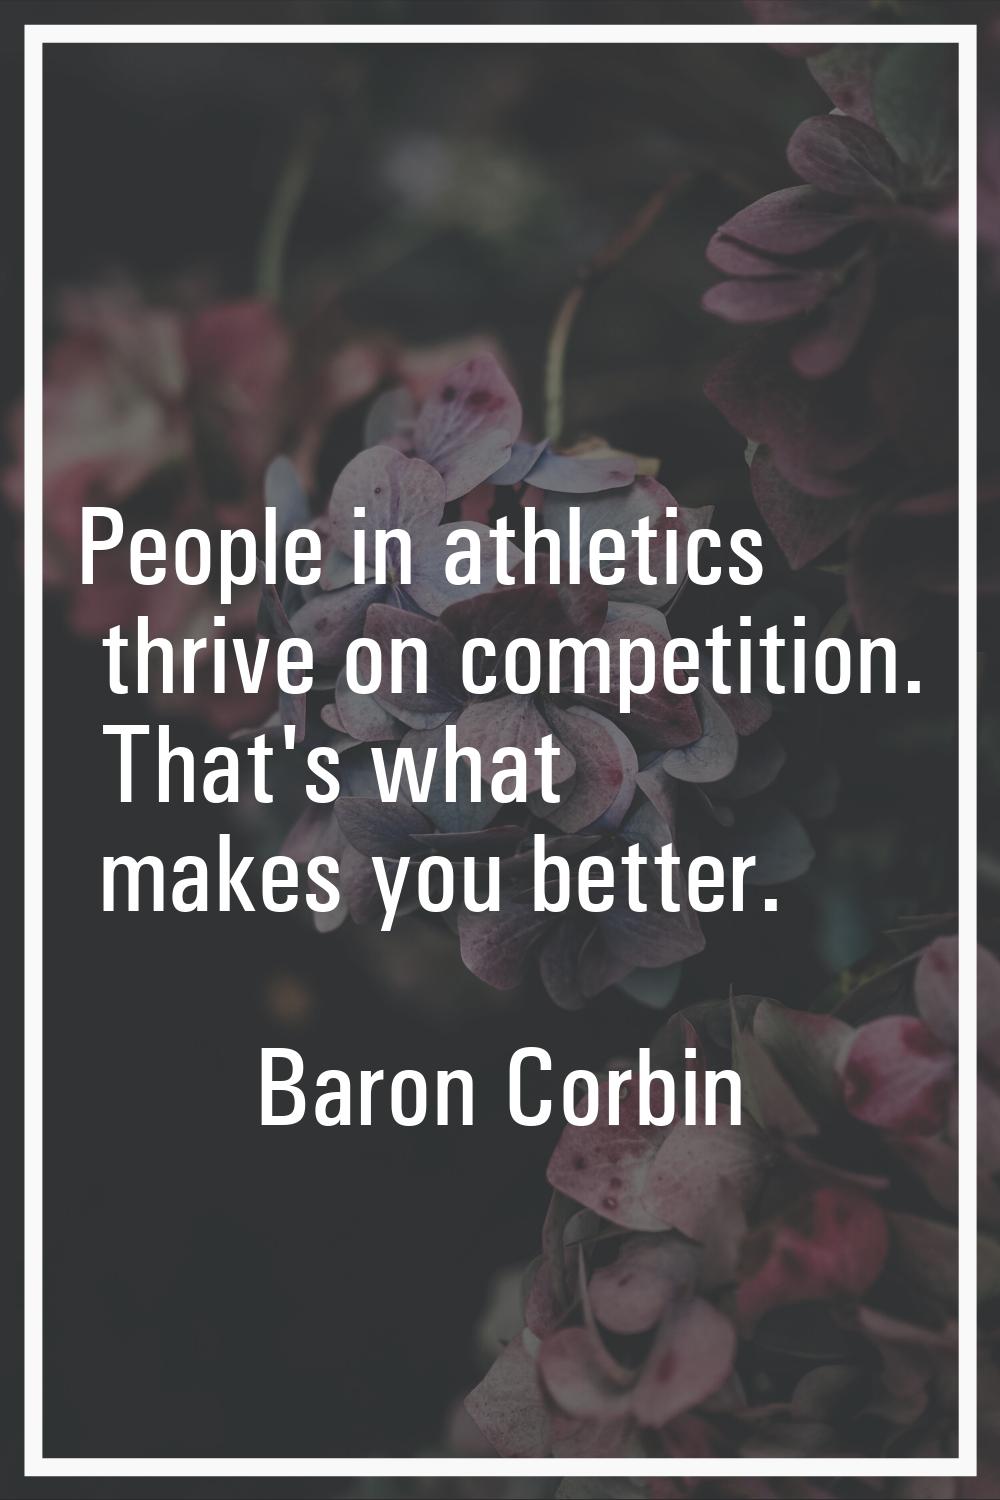 People in athletics thrive on competition. That's what makes you better.